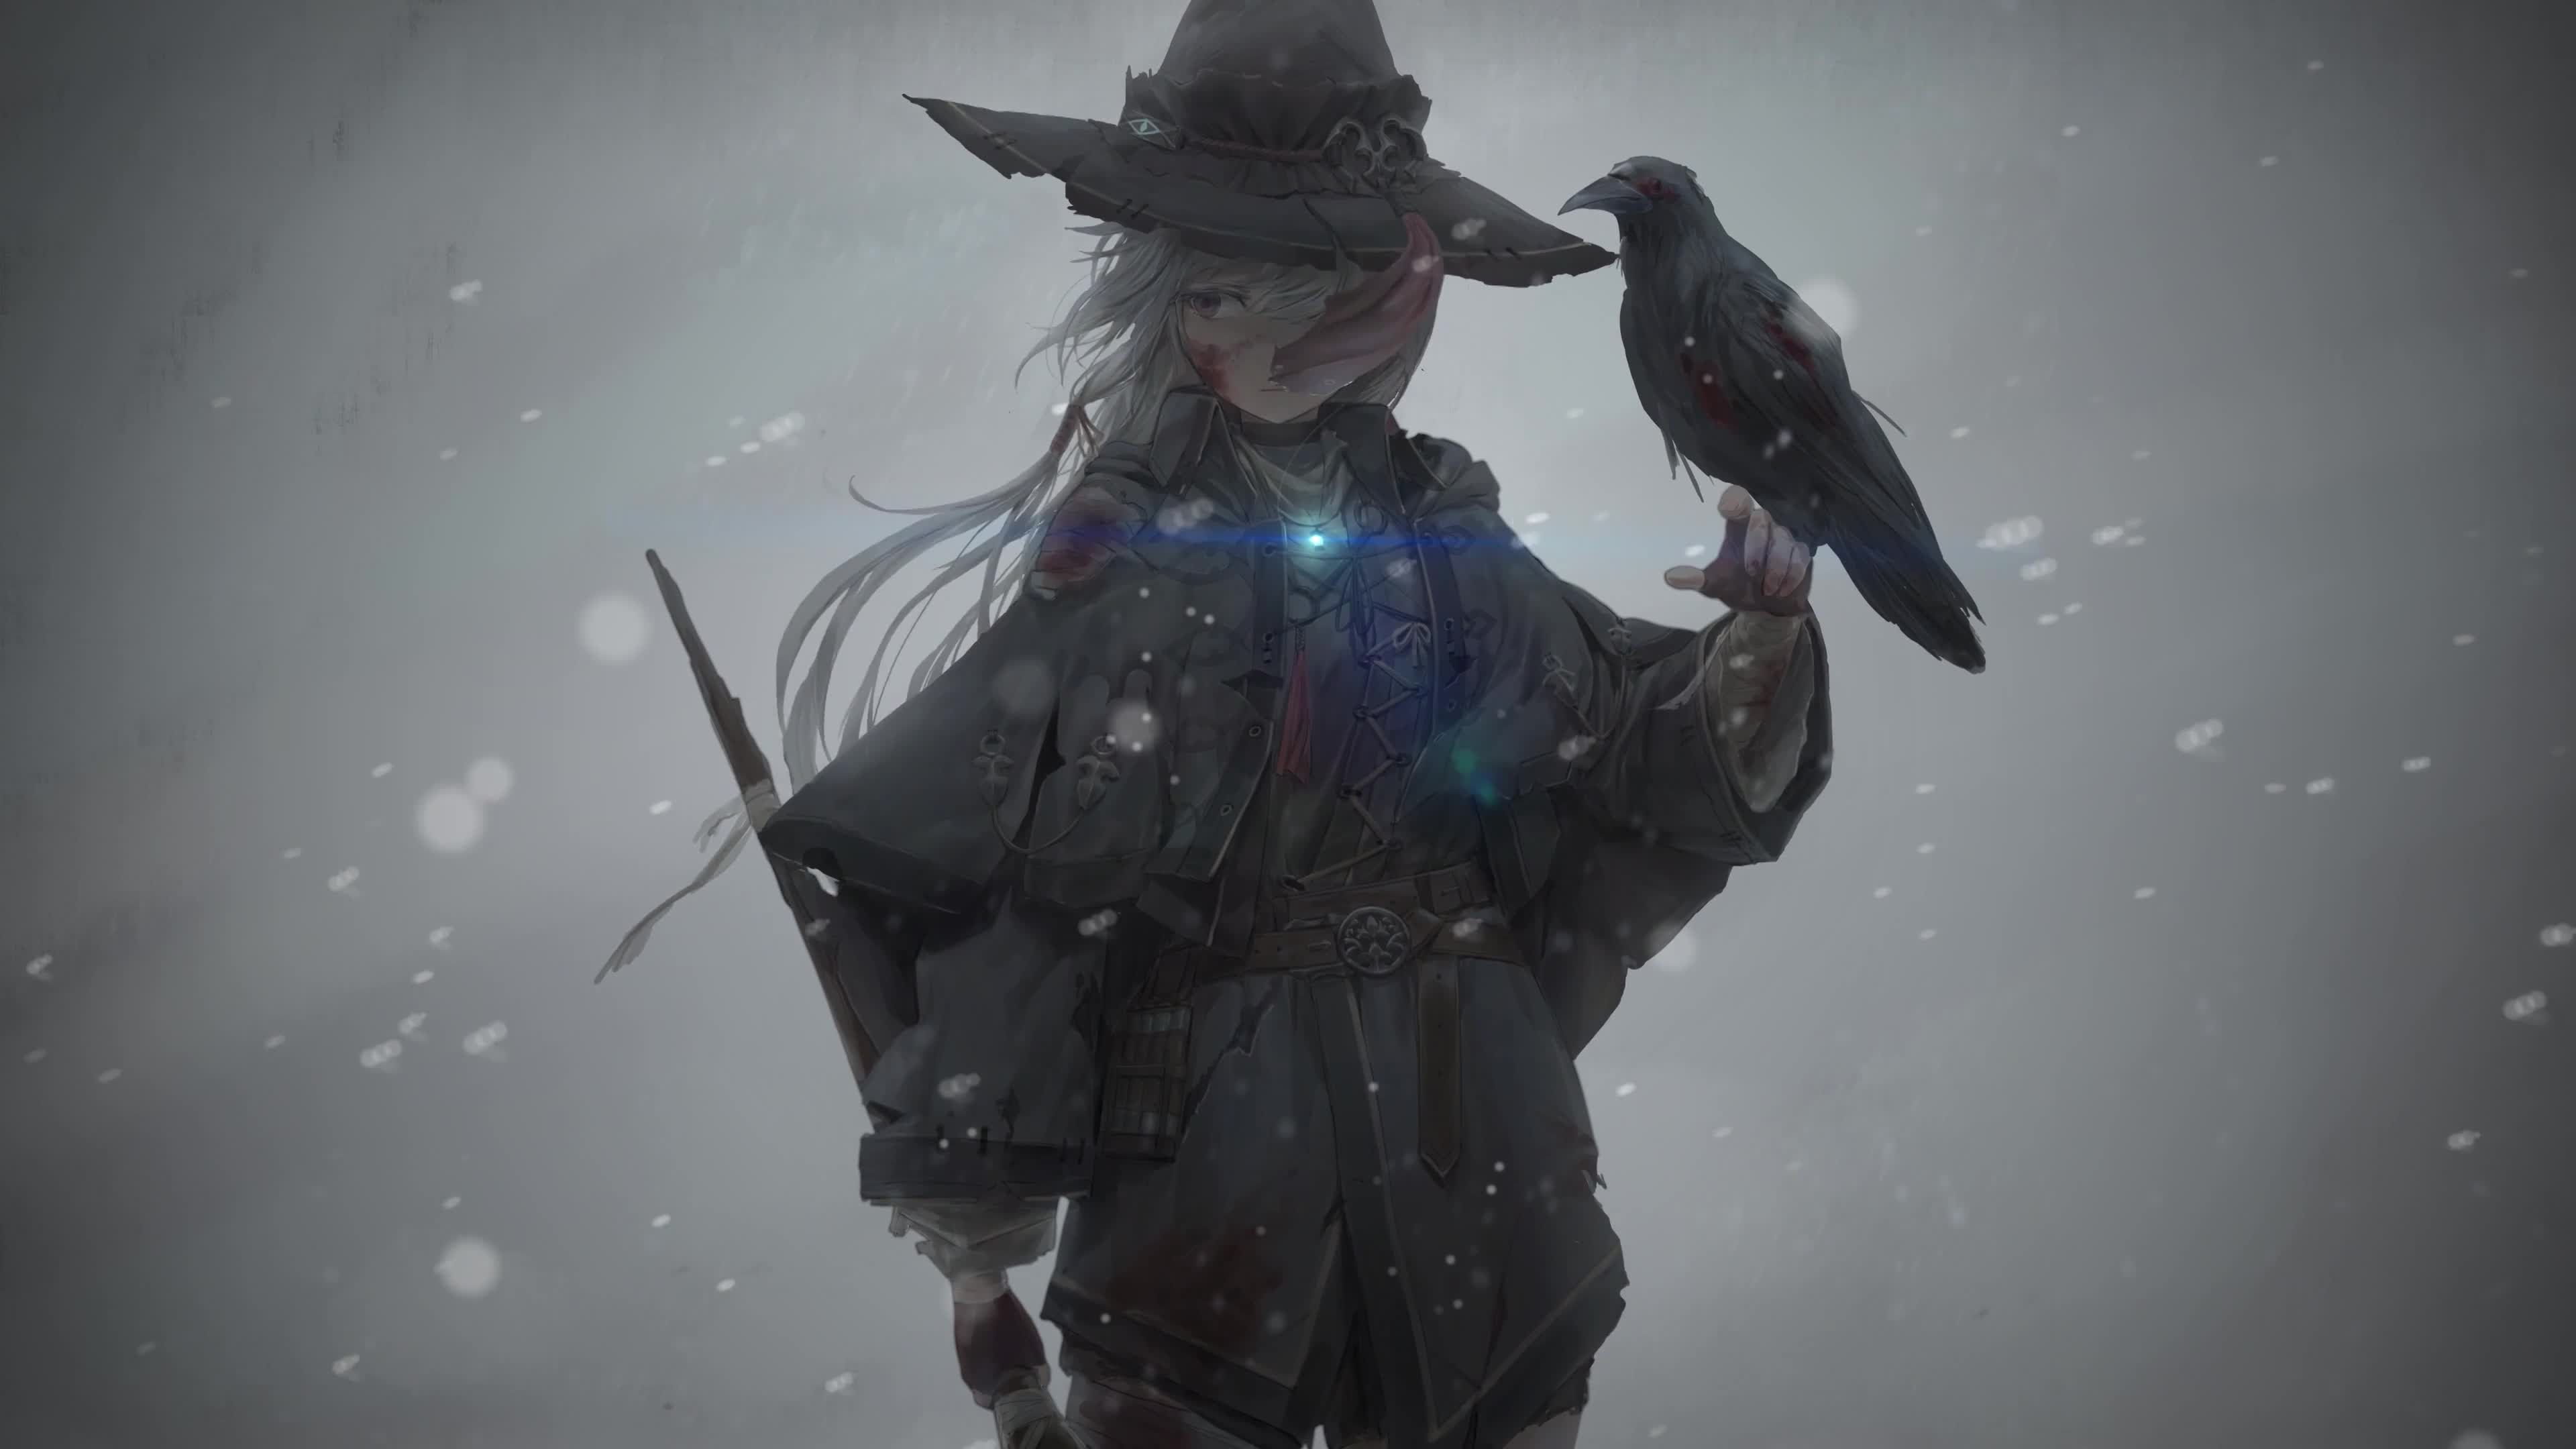 Infected Witch with Crow Anime Video 4K Wallpaper 4K of Wallpaper for Andriod